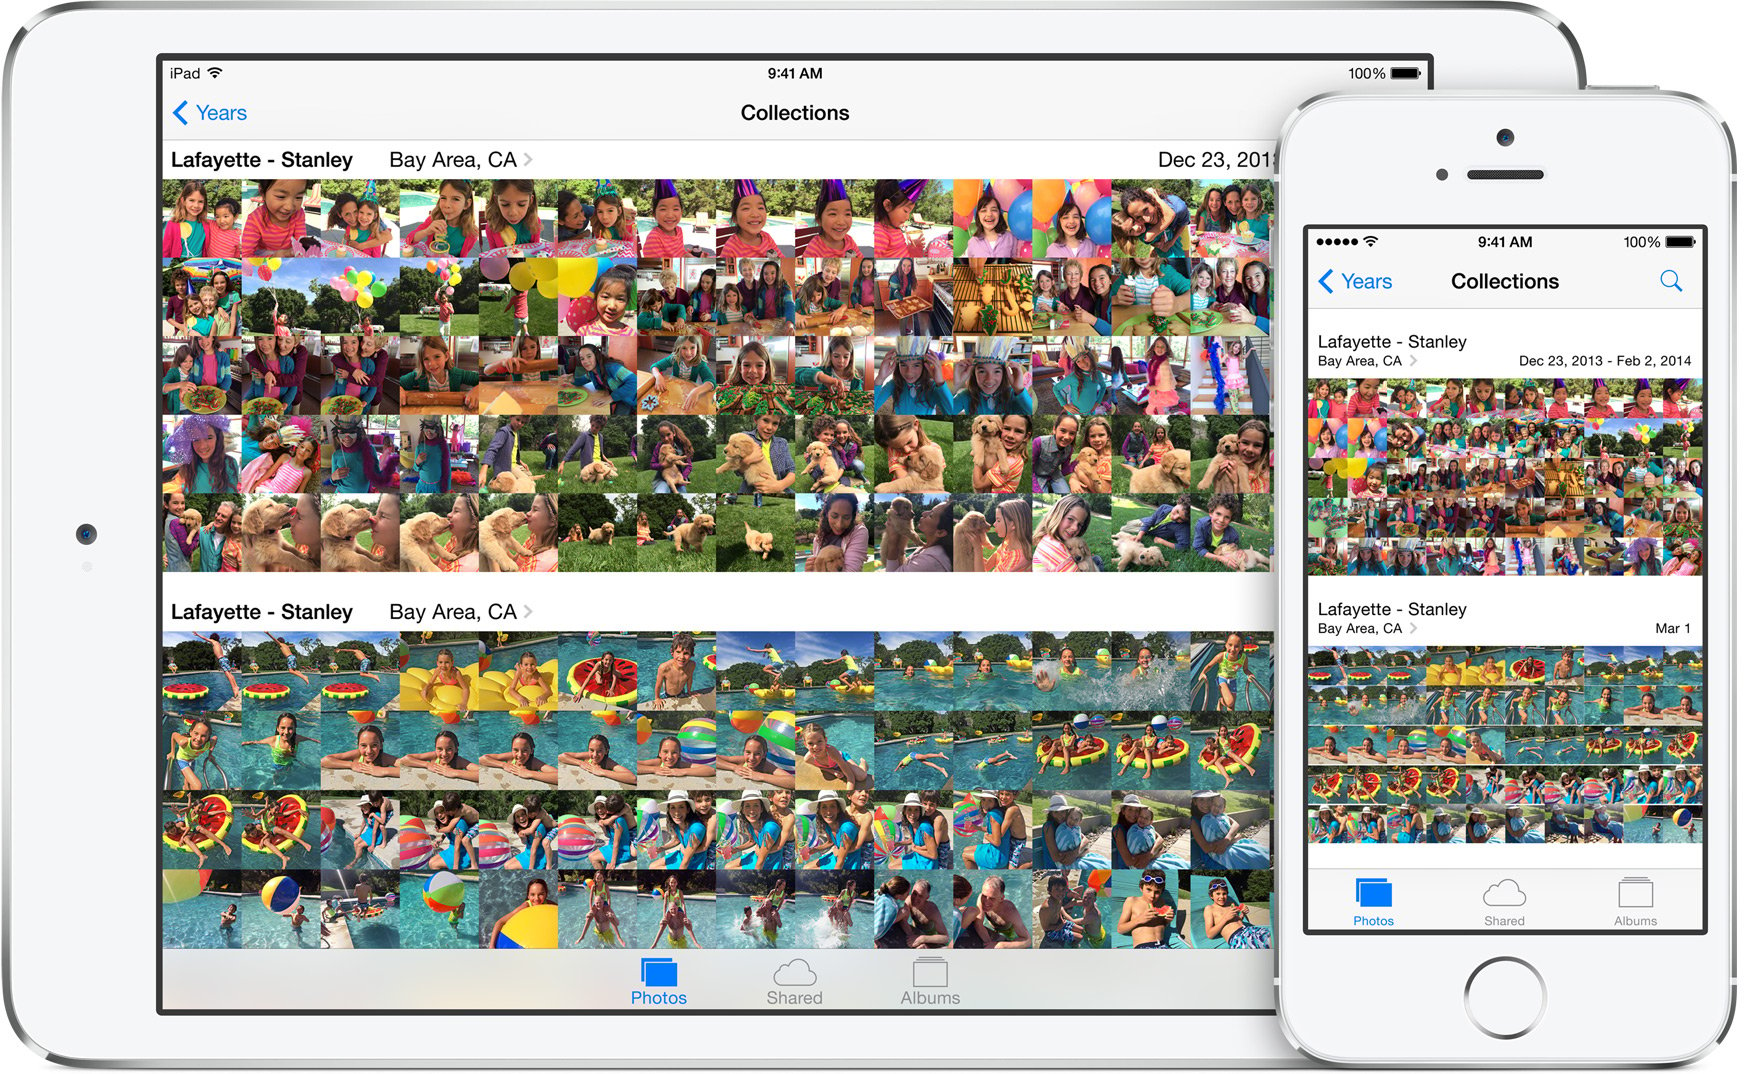 Any photo you take on an iPhone or import to your Mac is available in the cloud for easy sharing with your iPad running iOS 8.